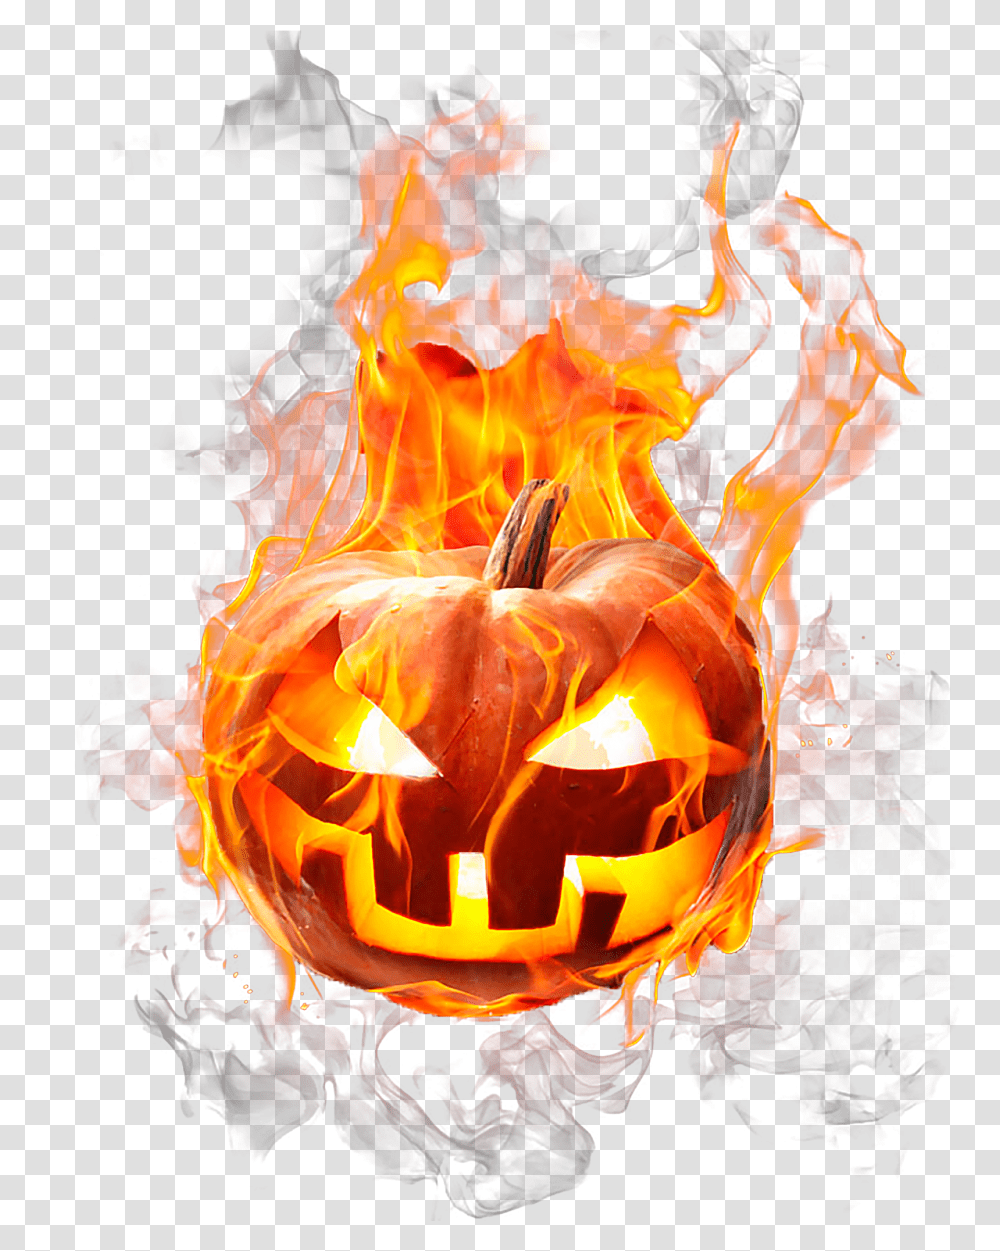 Halloween Pumpkin In Fire Image Free Download Searchpngcom Lantern Halloween Pumpkin Fire, Bonfire, Flame Transparent Png